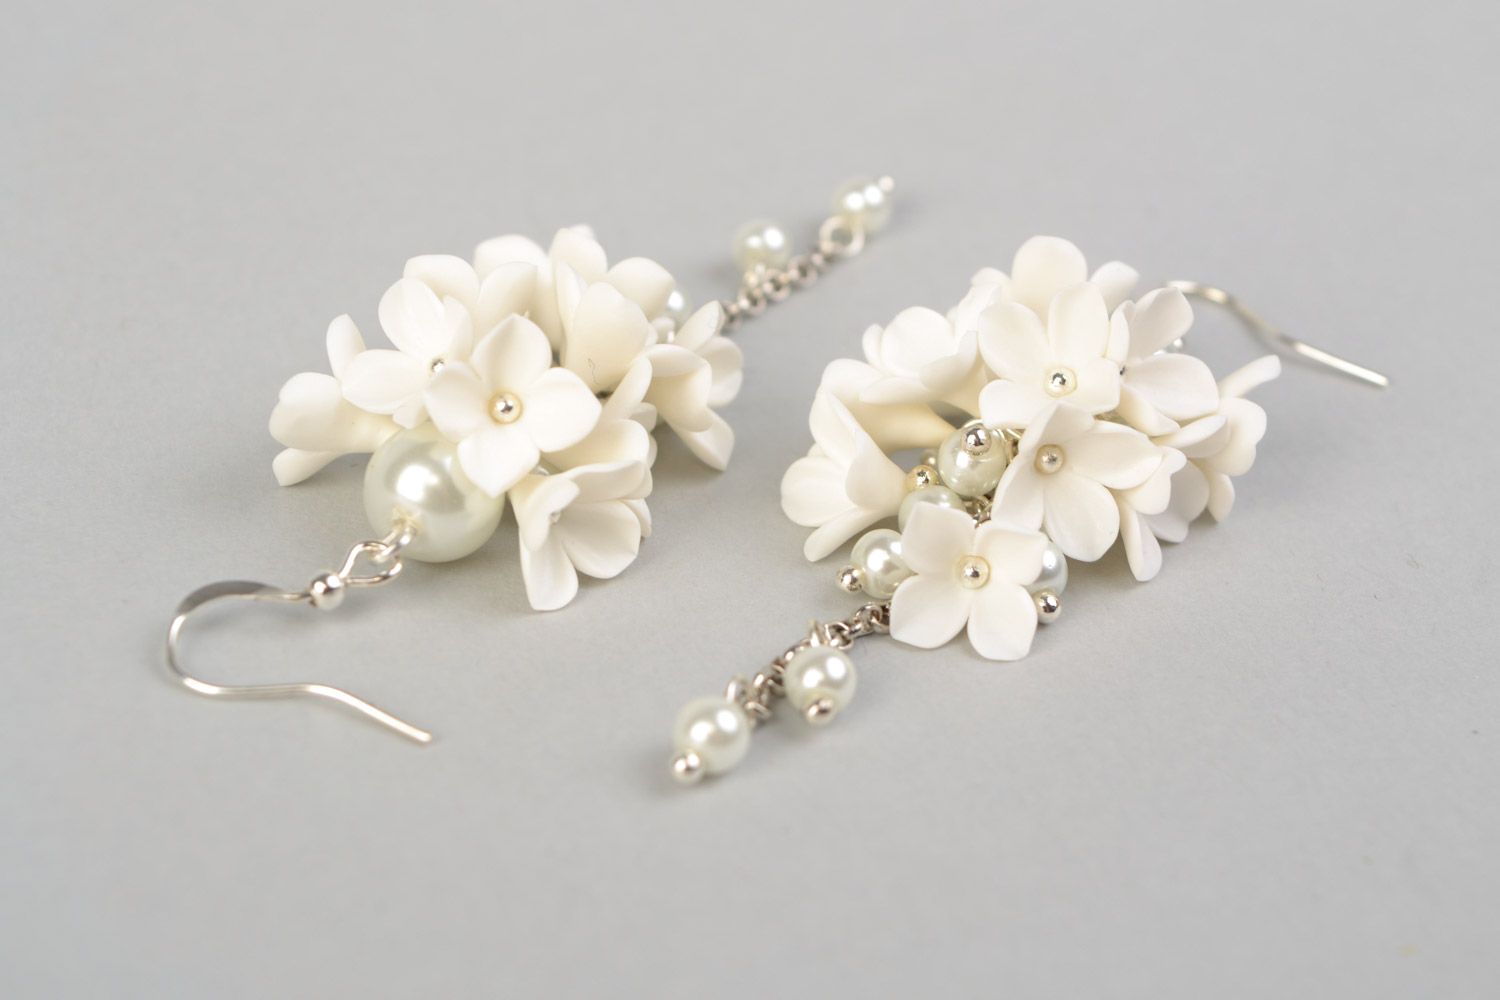 Handmade wedding dangling earrings with white polymer clay flowers and glass beads photo 4